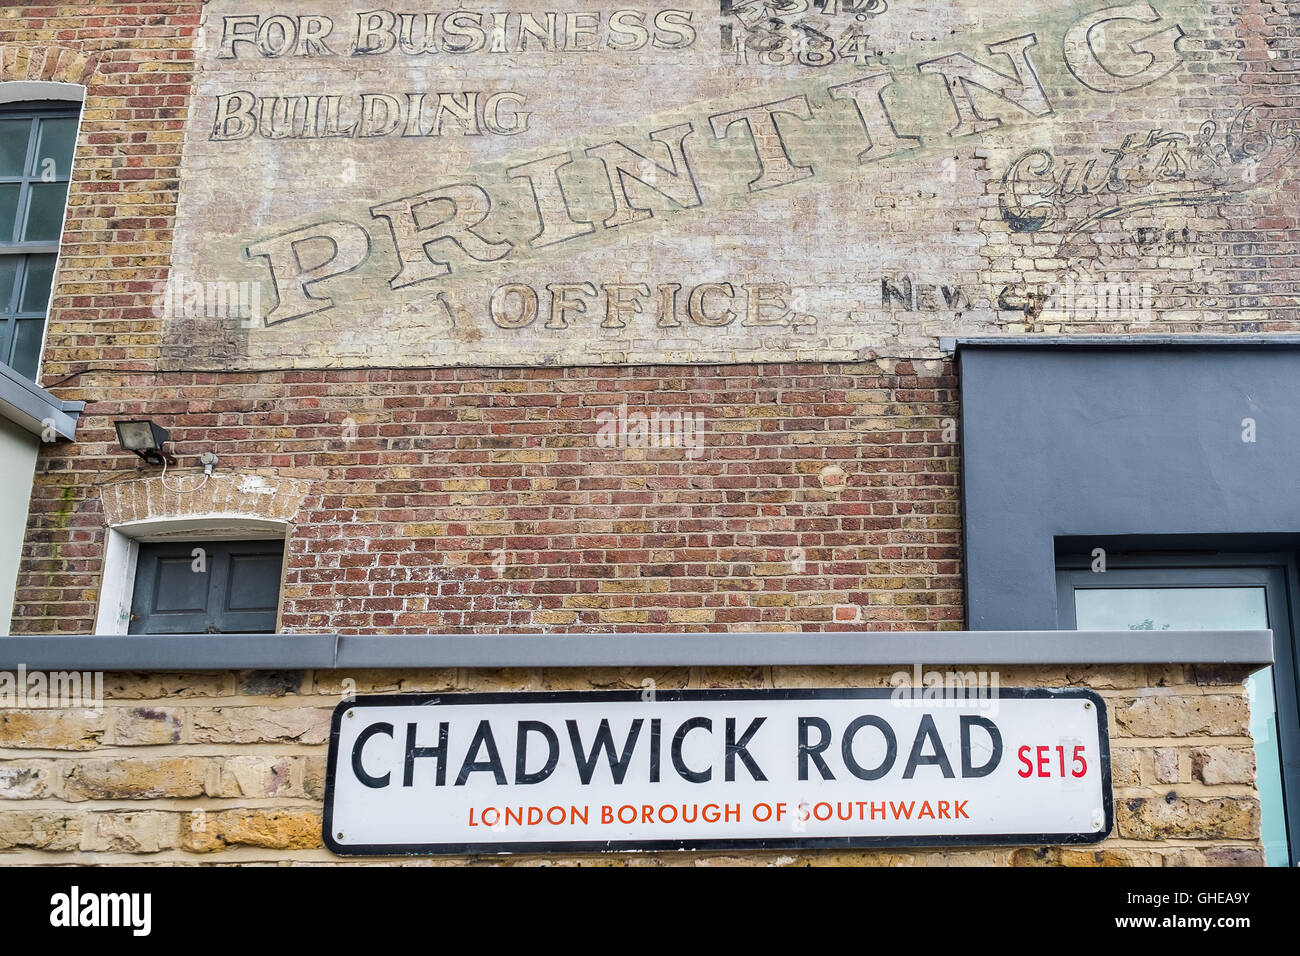 Chadwick Road, SE15 street sign on wall below an old Printing business sign, Peckham, South East London, England, UK Stock Photo